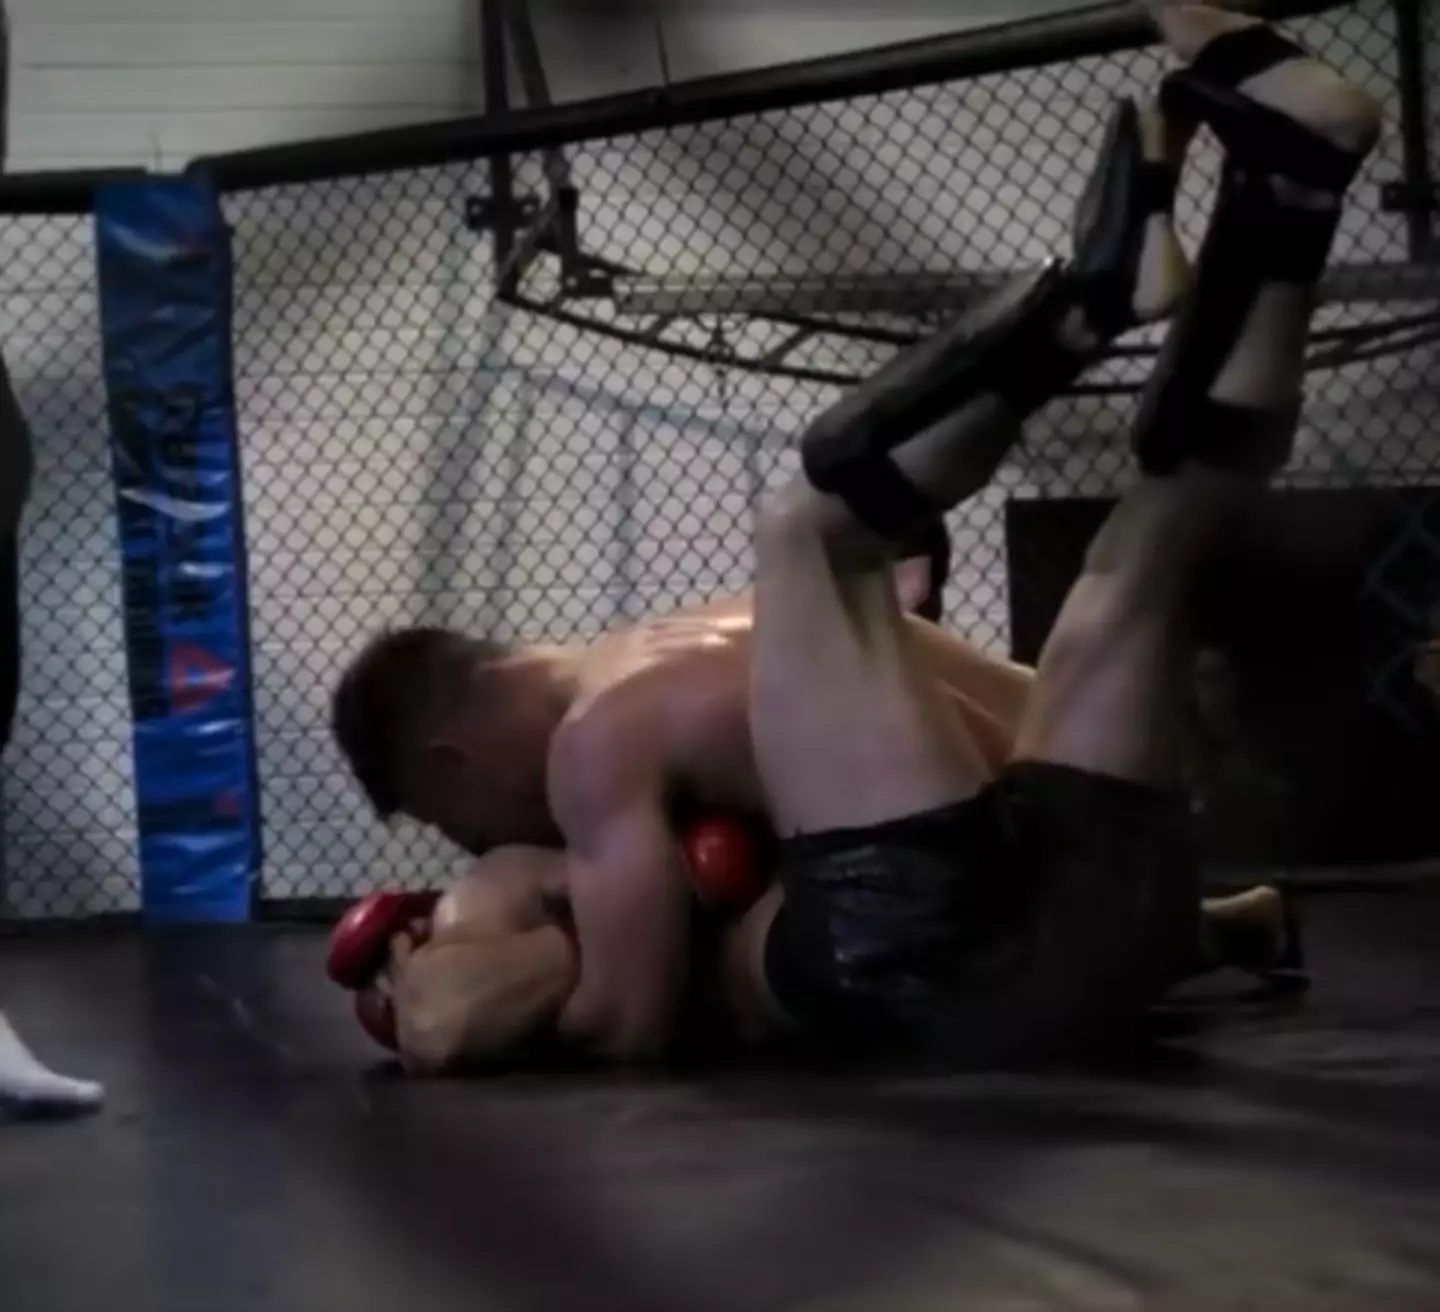 The never-before-seen footage shows the gory moment Conor McGregor dislocated his toe.